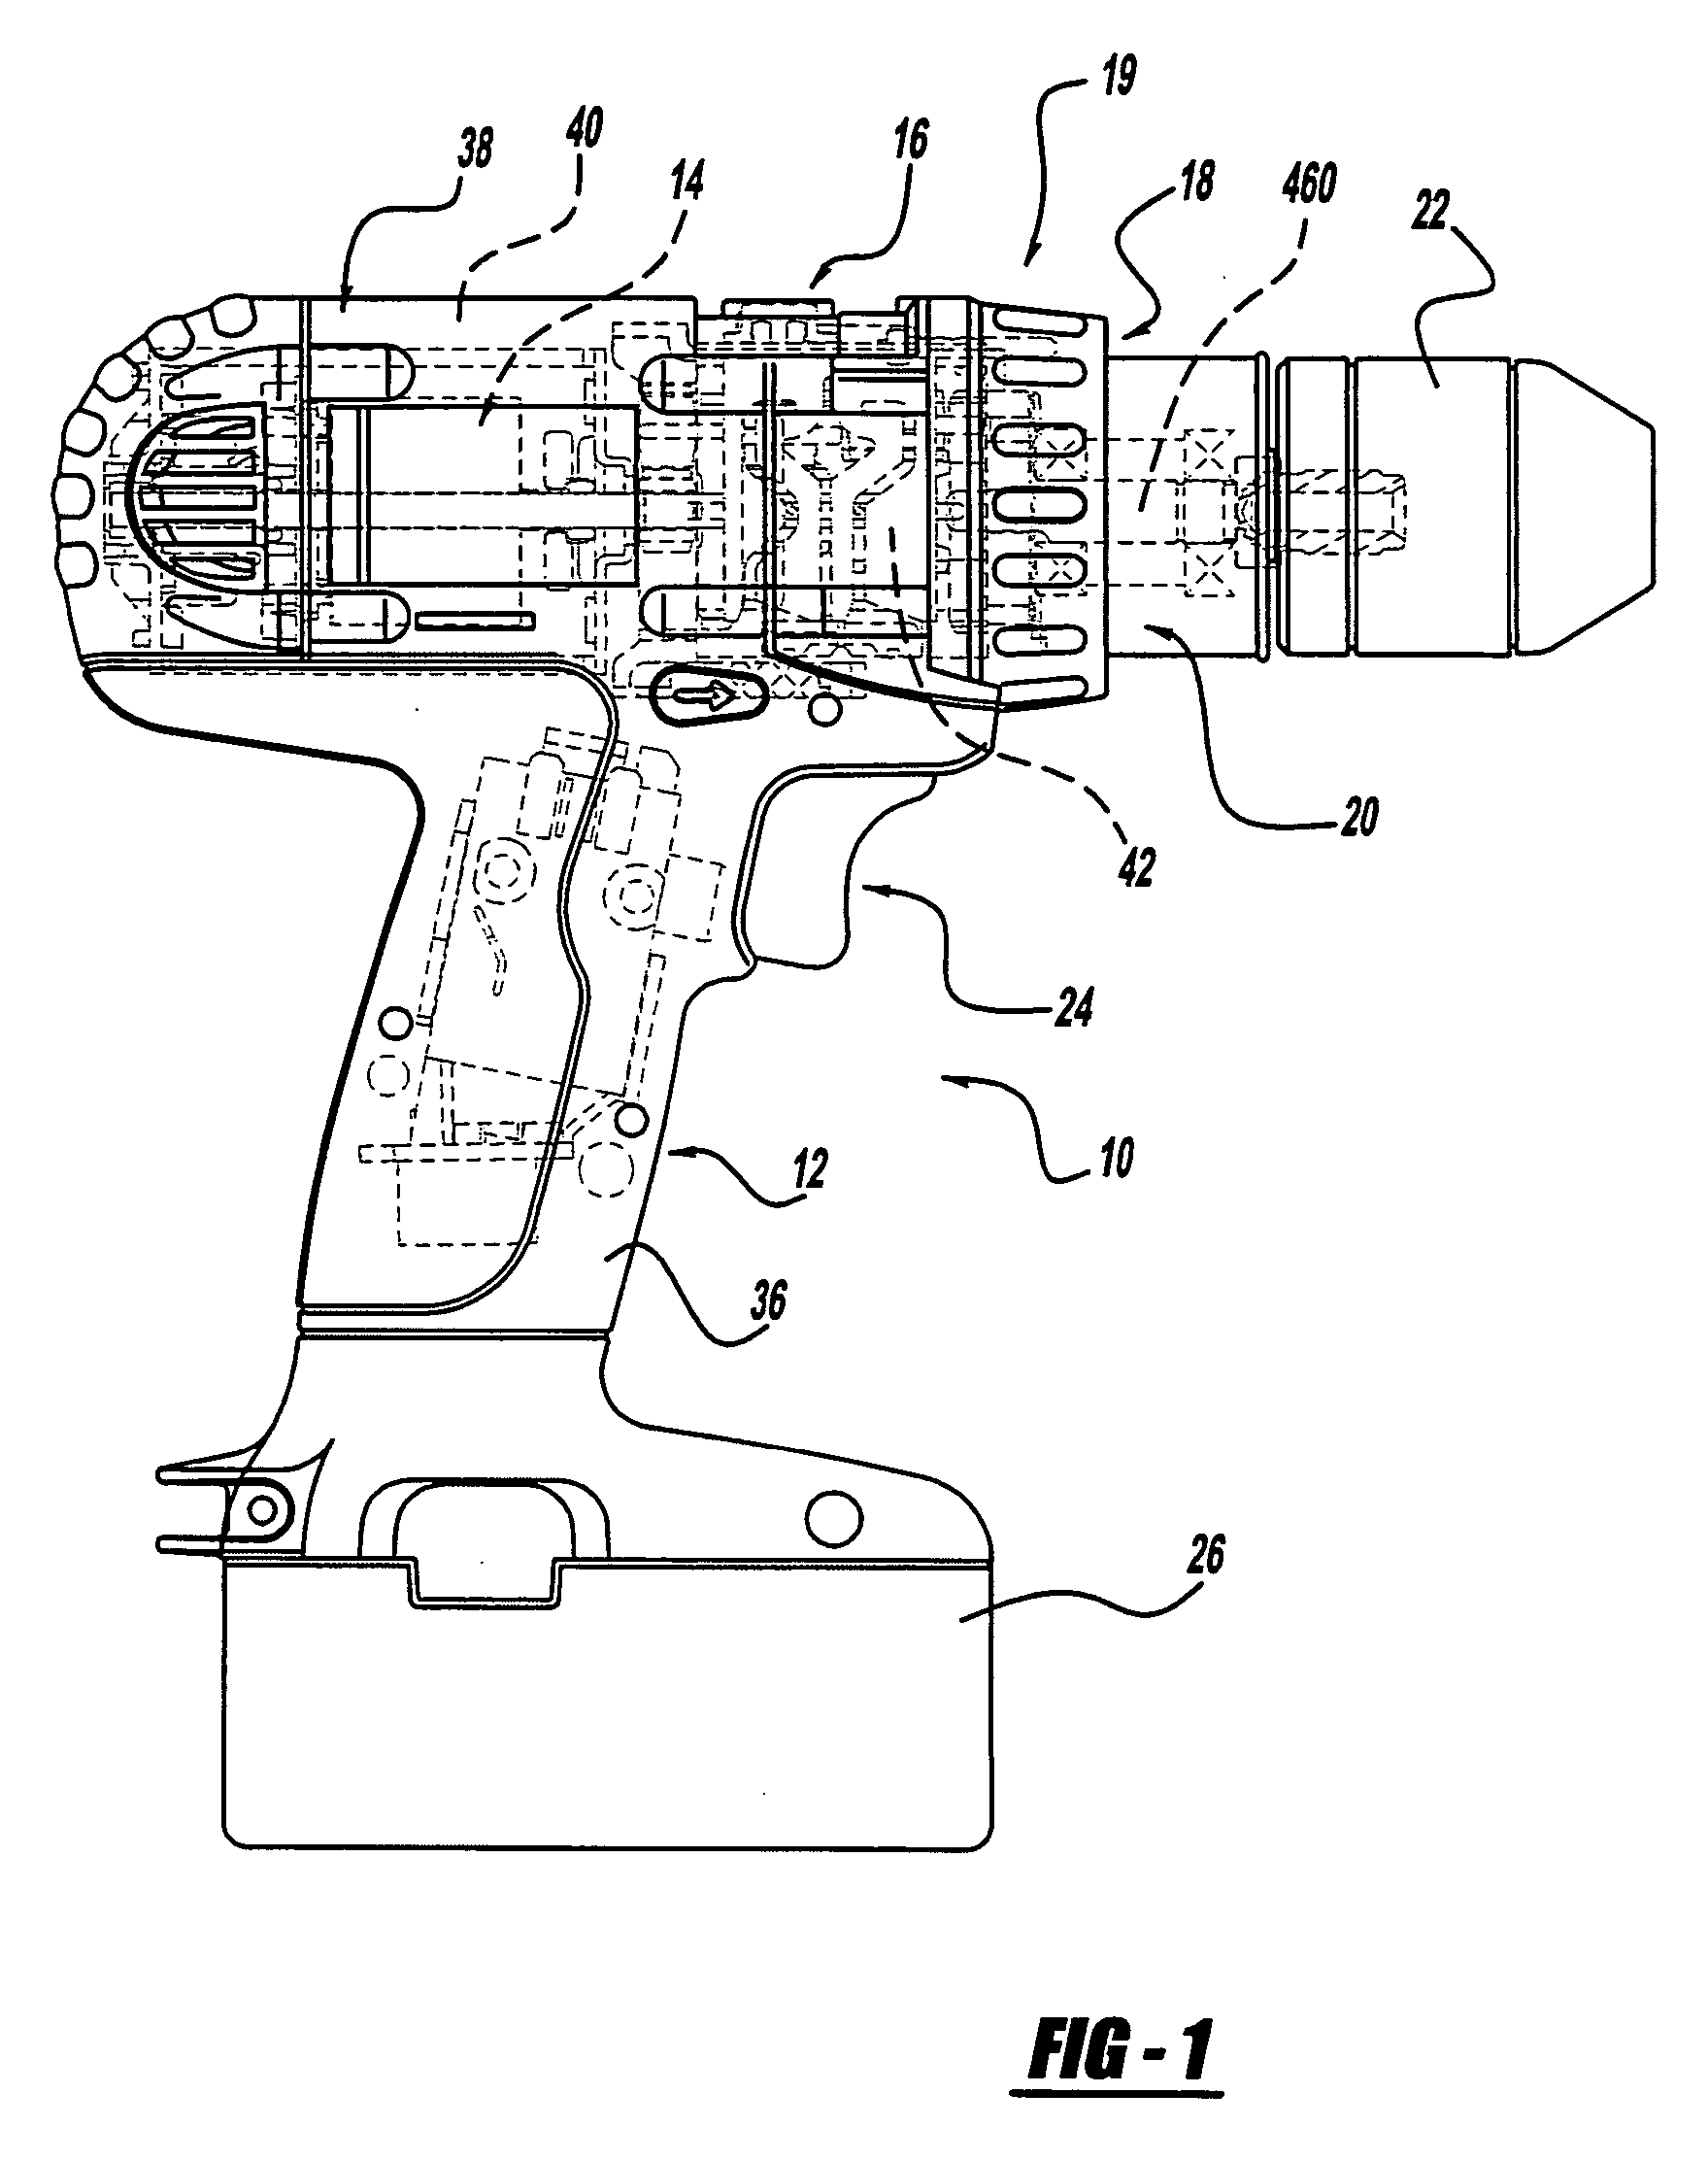 Hammer drill with a mode changeover mechanism